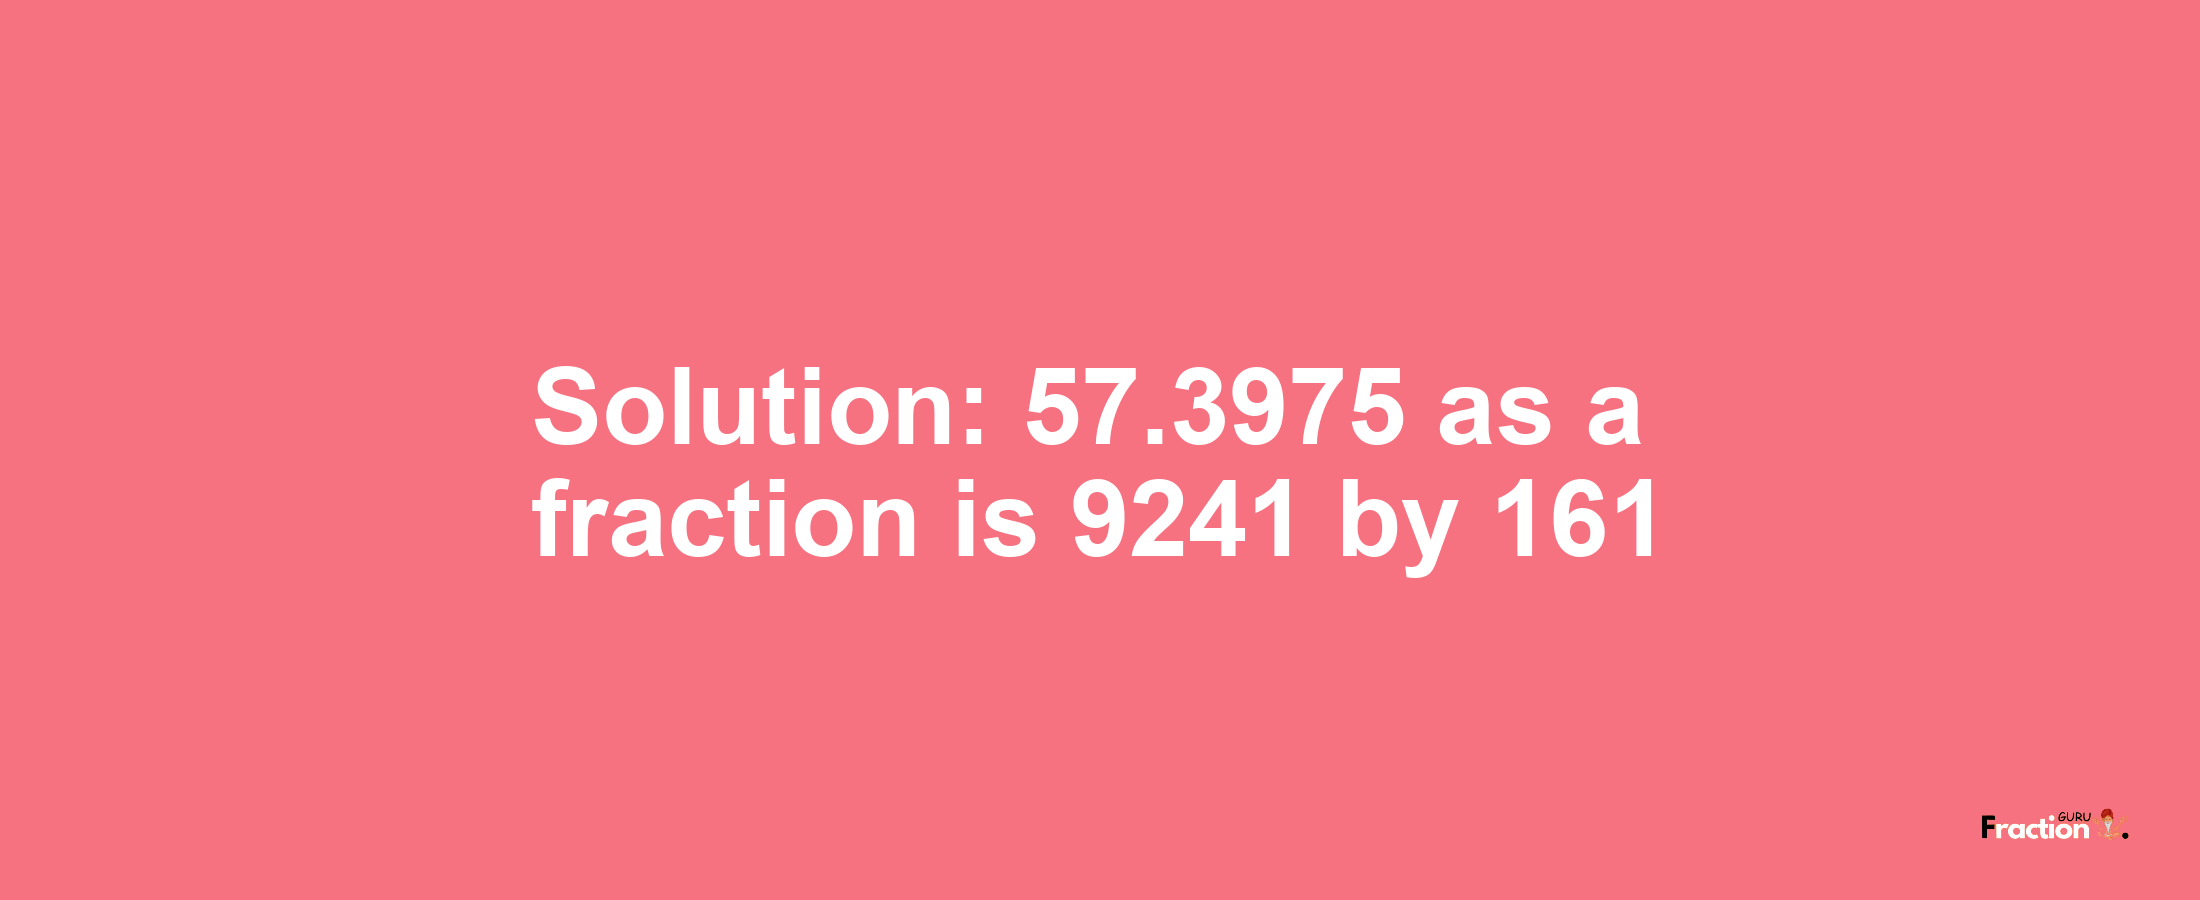 Solution:57.3975 as a fraction is 9241/161